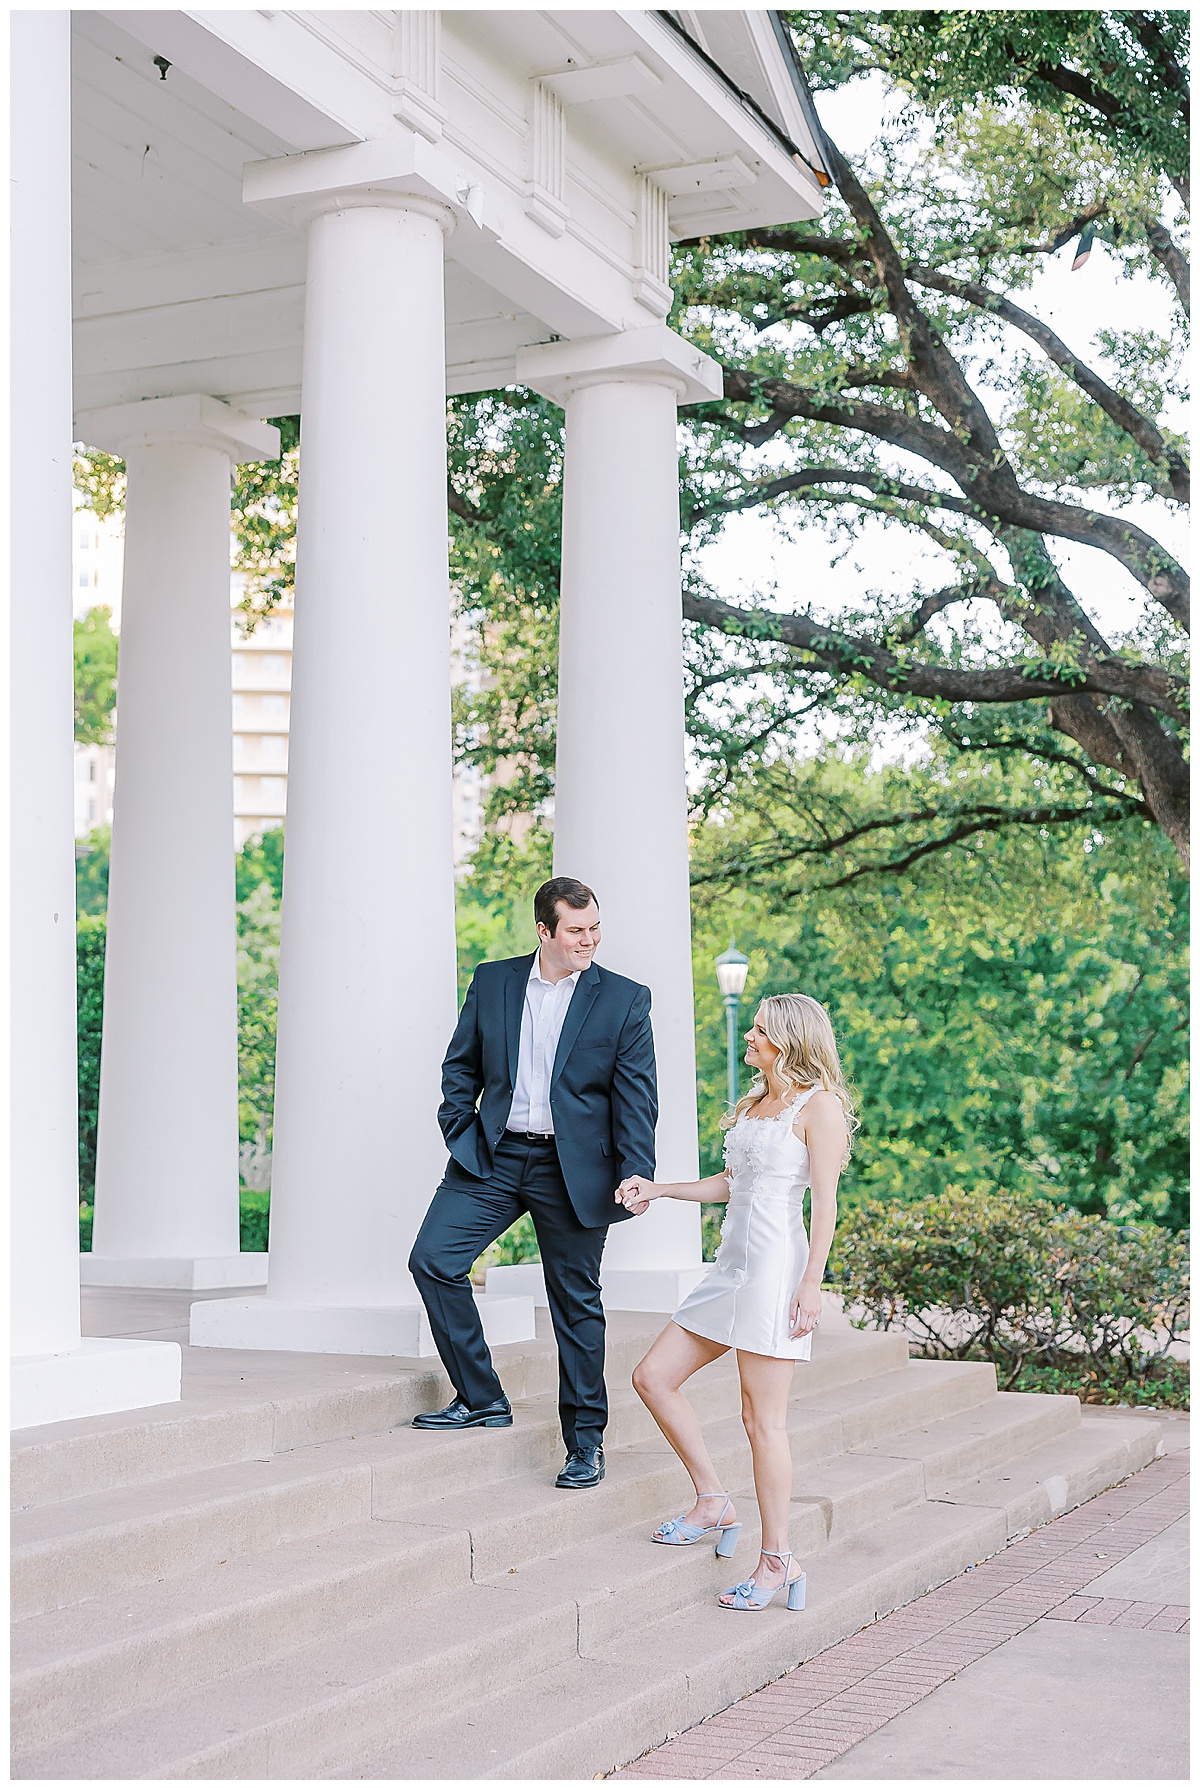 Hayden and Sarah's engagement session at Arlington Hall in Dallas, TX.